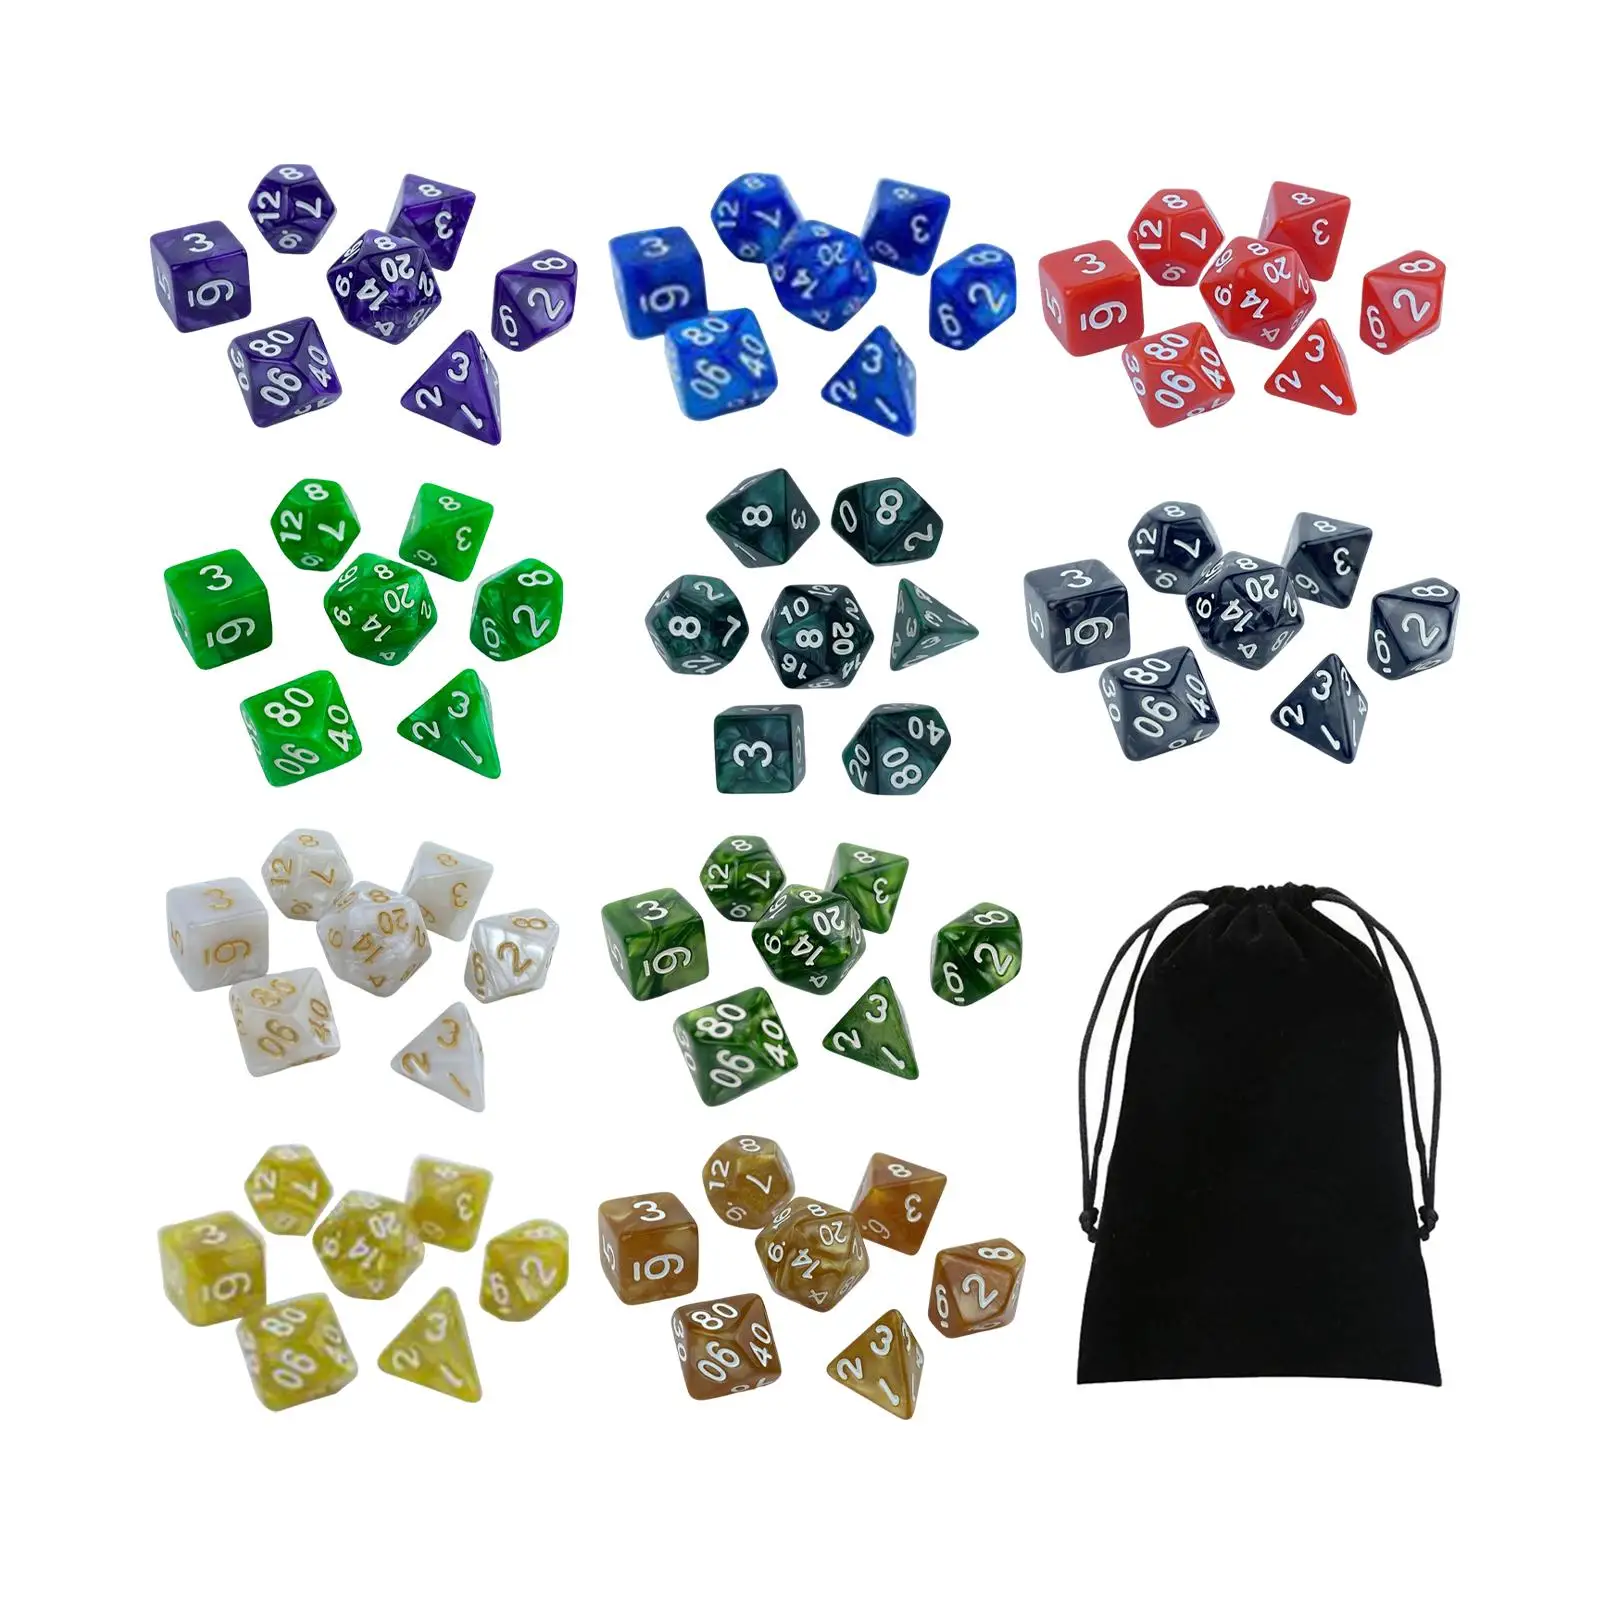 70Pcs Polyhedral   Board Game Props Toy Polyhedral   Set for D20